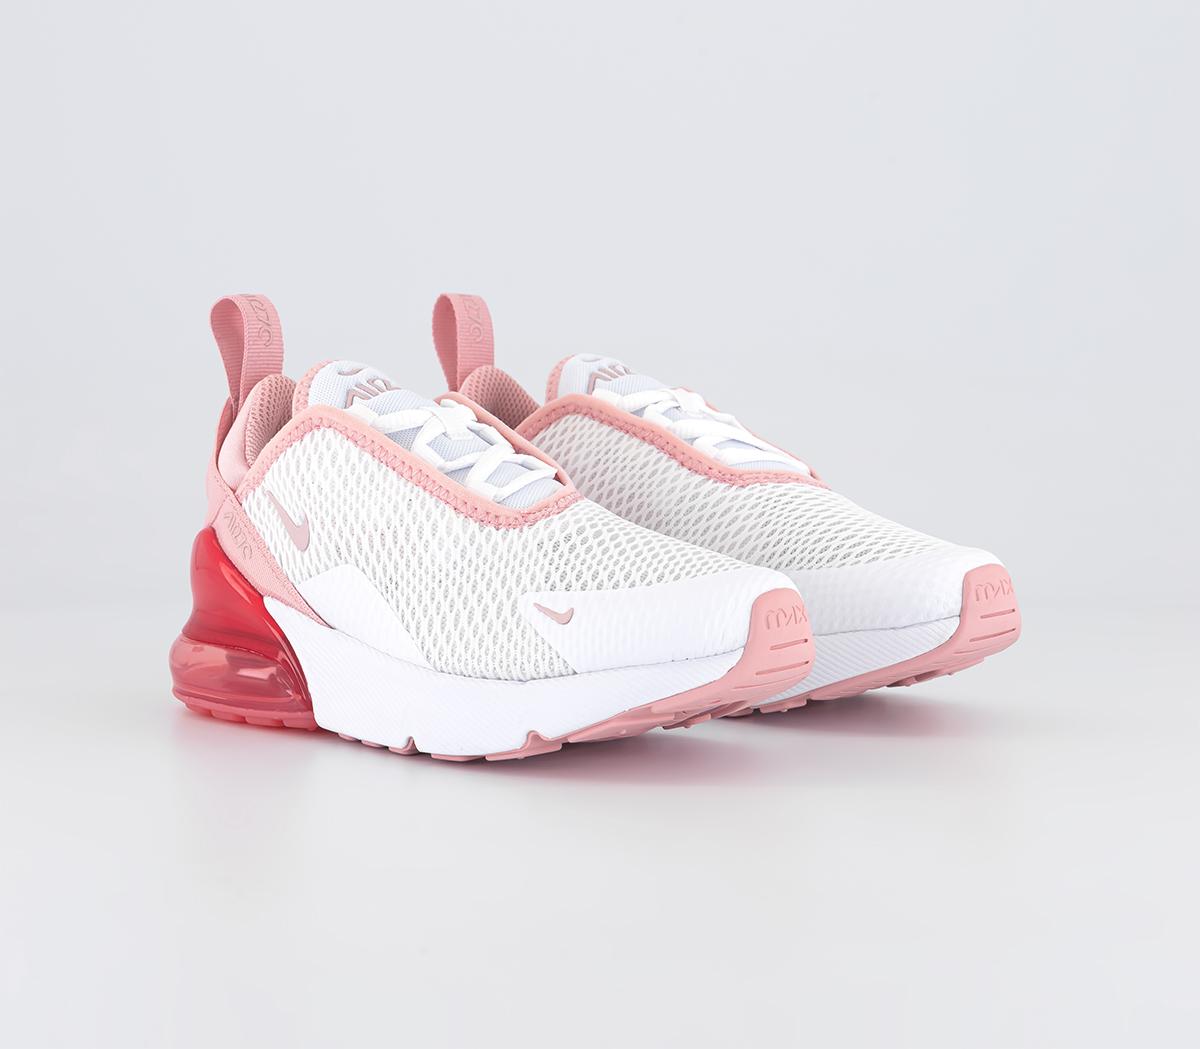 Nike Kids Air Max 270 Ps Trainers White Pink Glaze Salt, 10 Youth